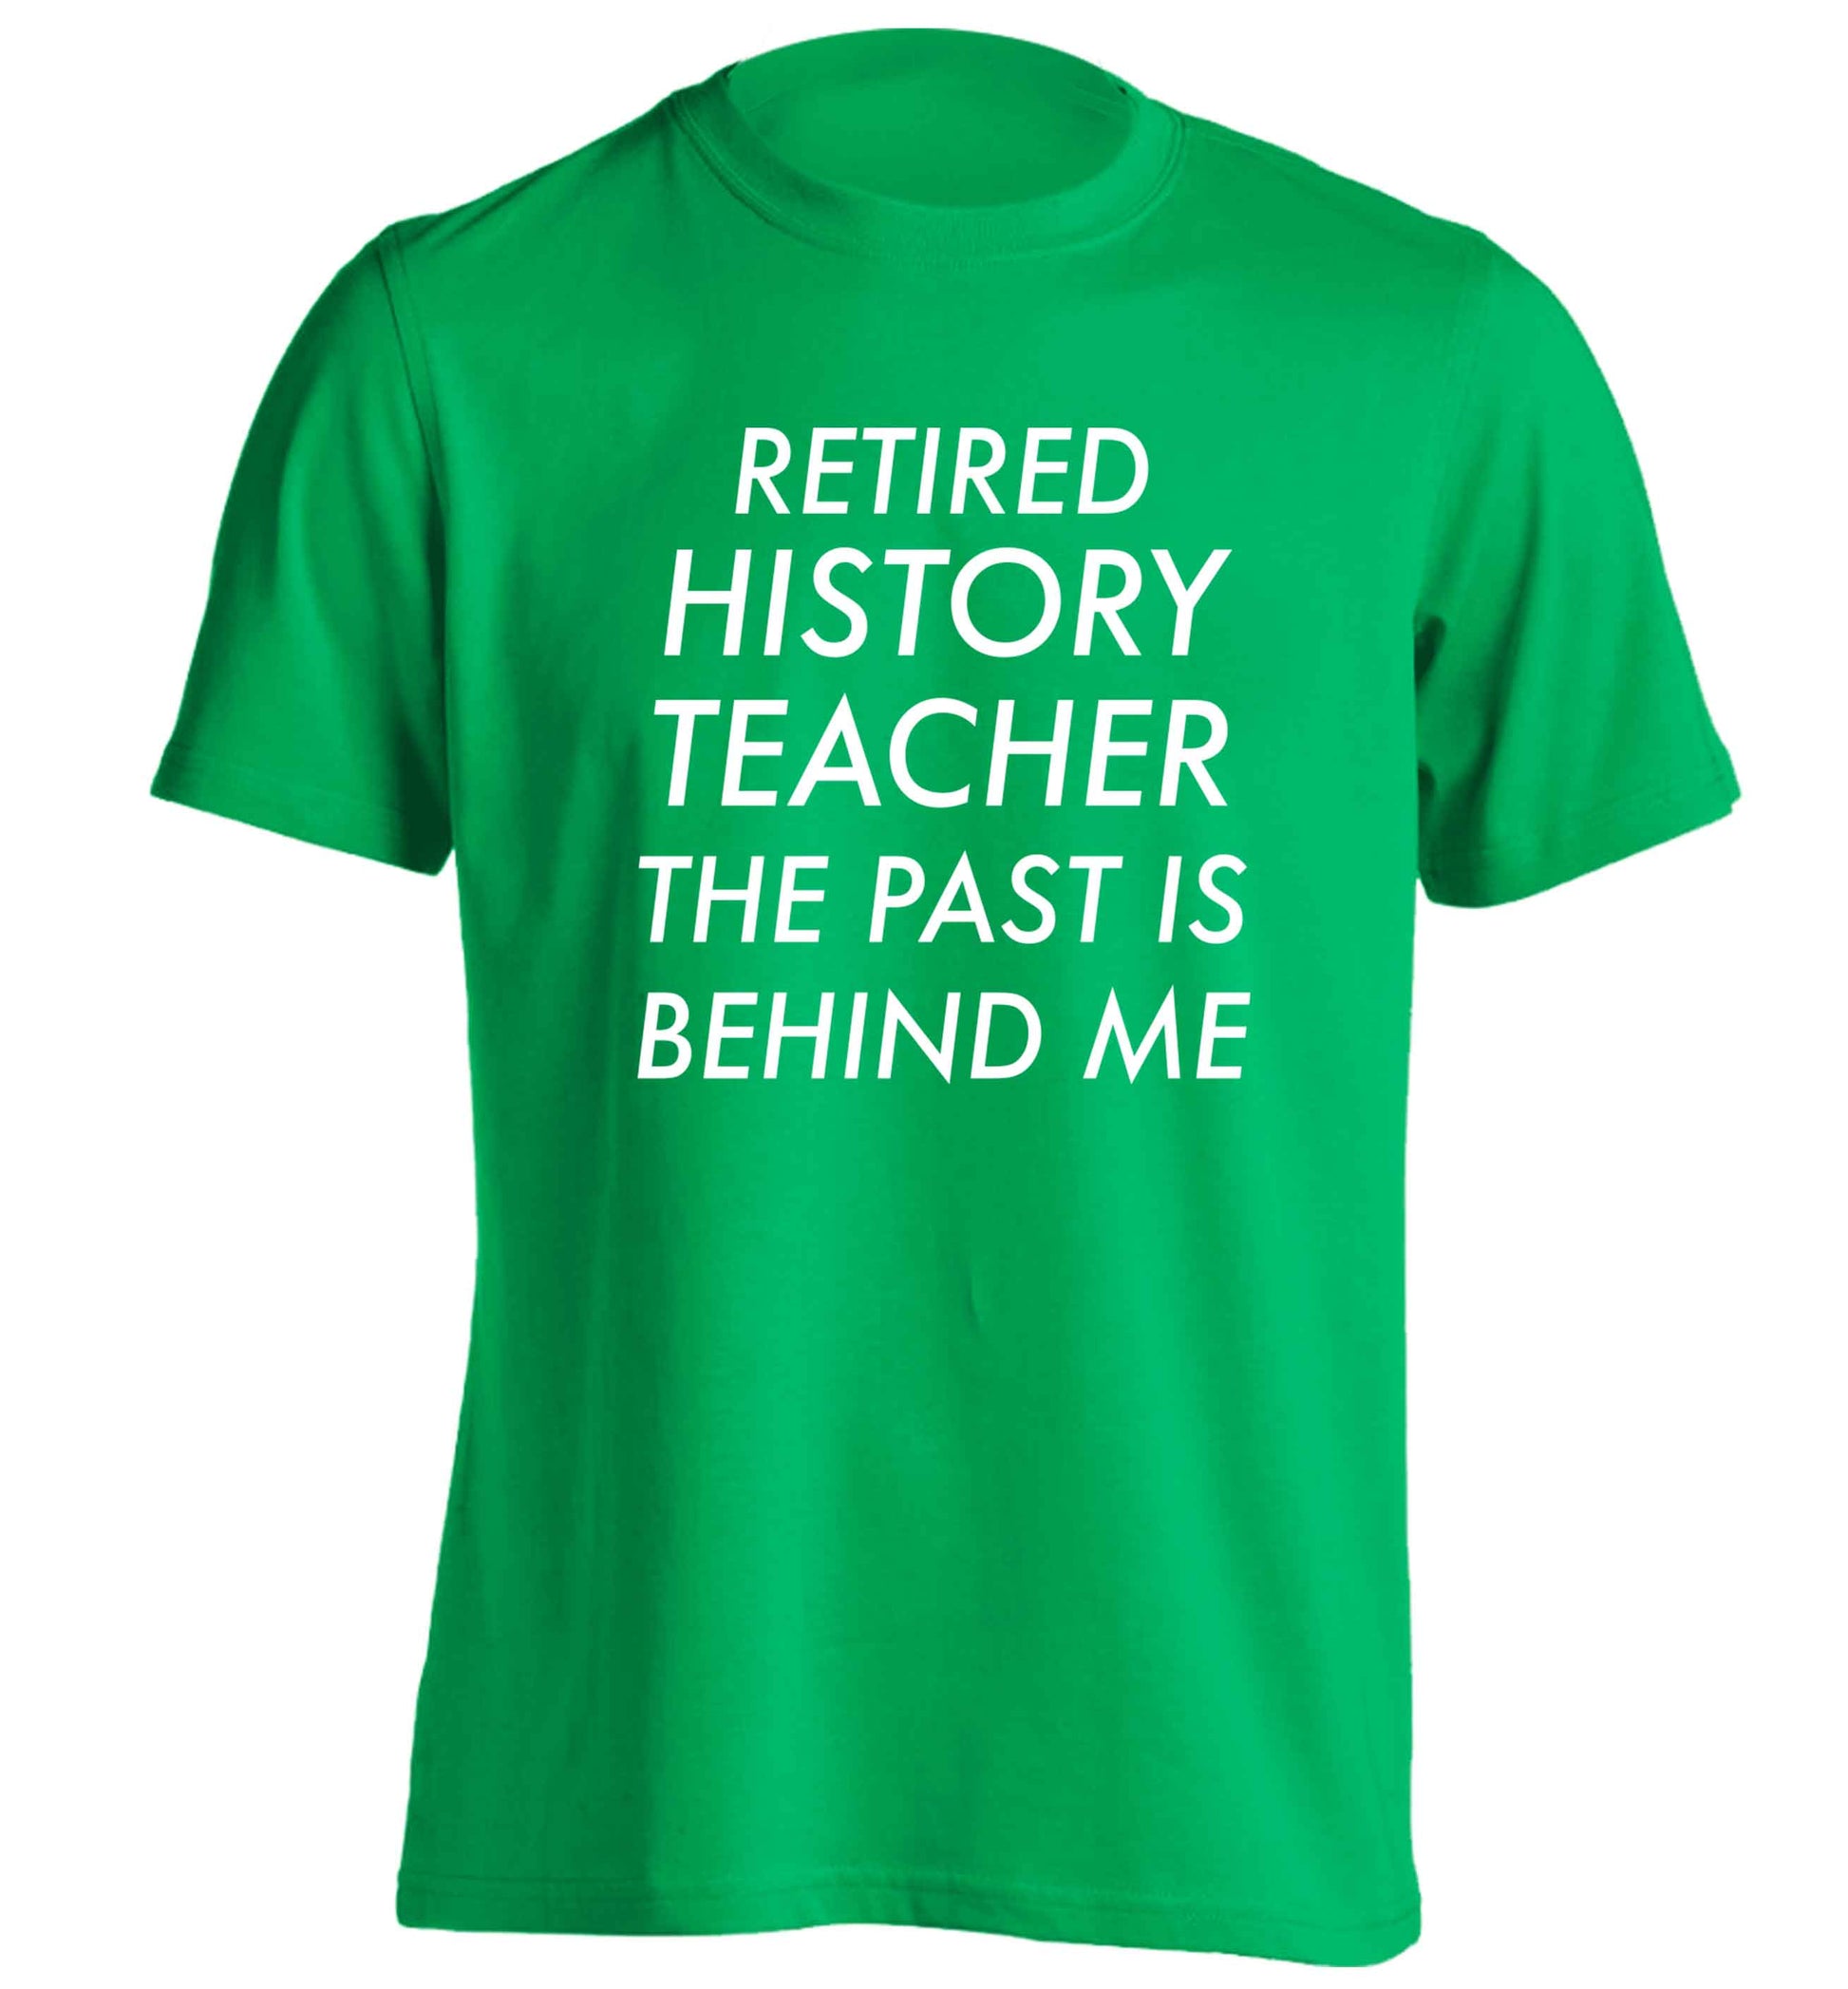 Retired history teacher the past is behind me adults unisex green Tshirt 2XL